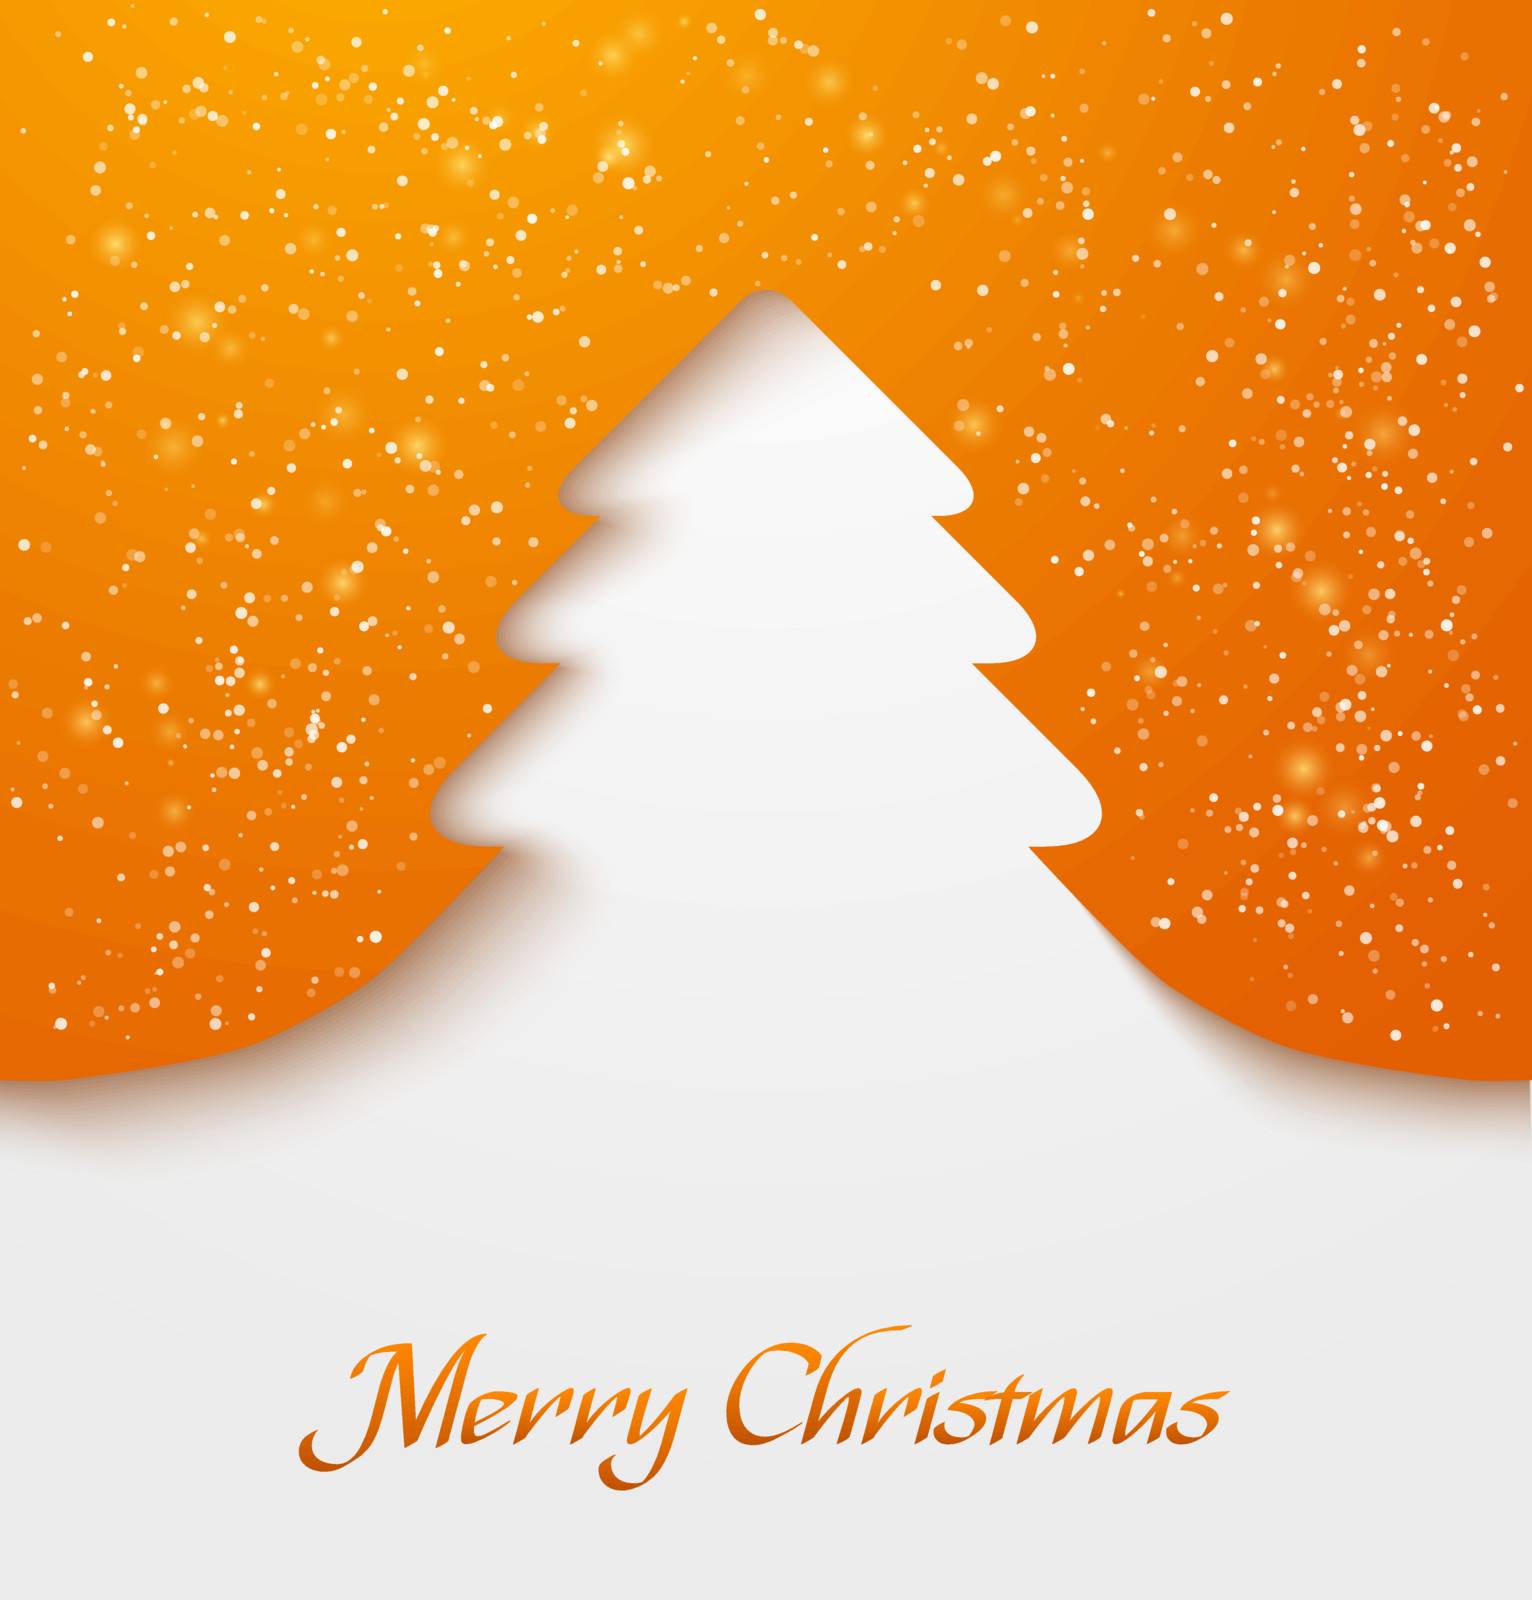 Orange abstract christmas tree applique with snow particles. Vector illustration